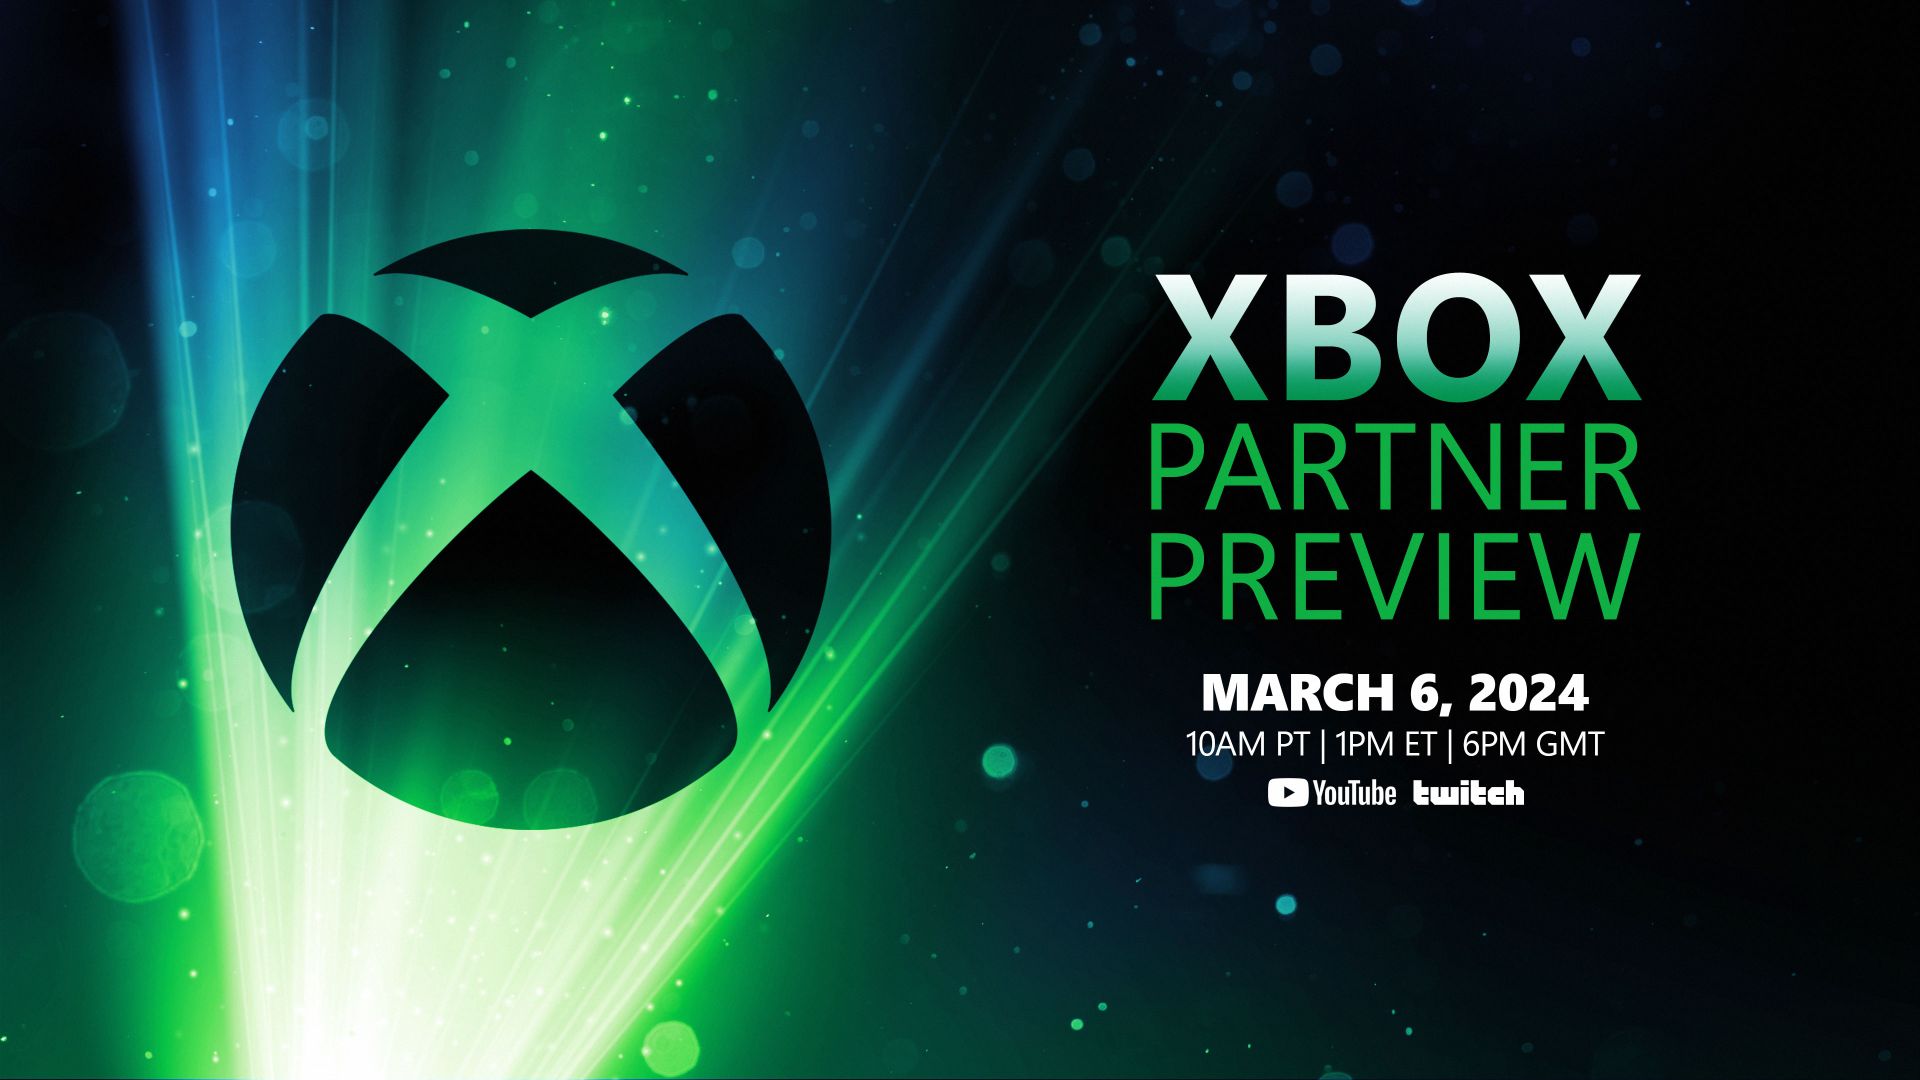 # Xbox Partner Preview live stream set for March 6 – 30 minutes of more than a dozen new trailers